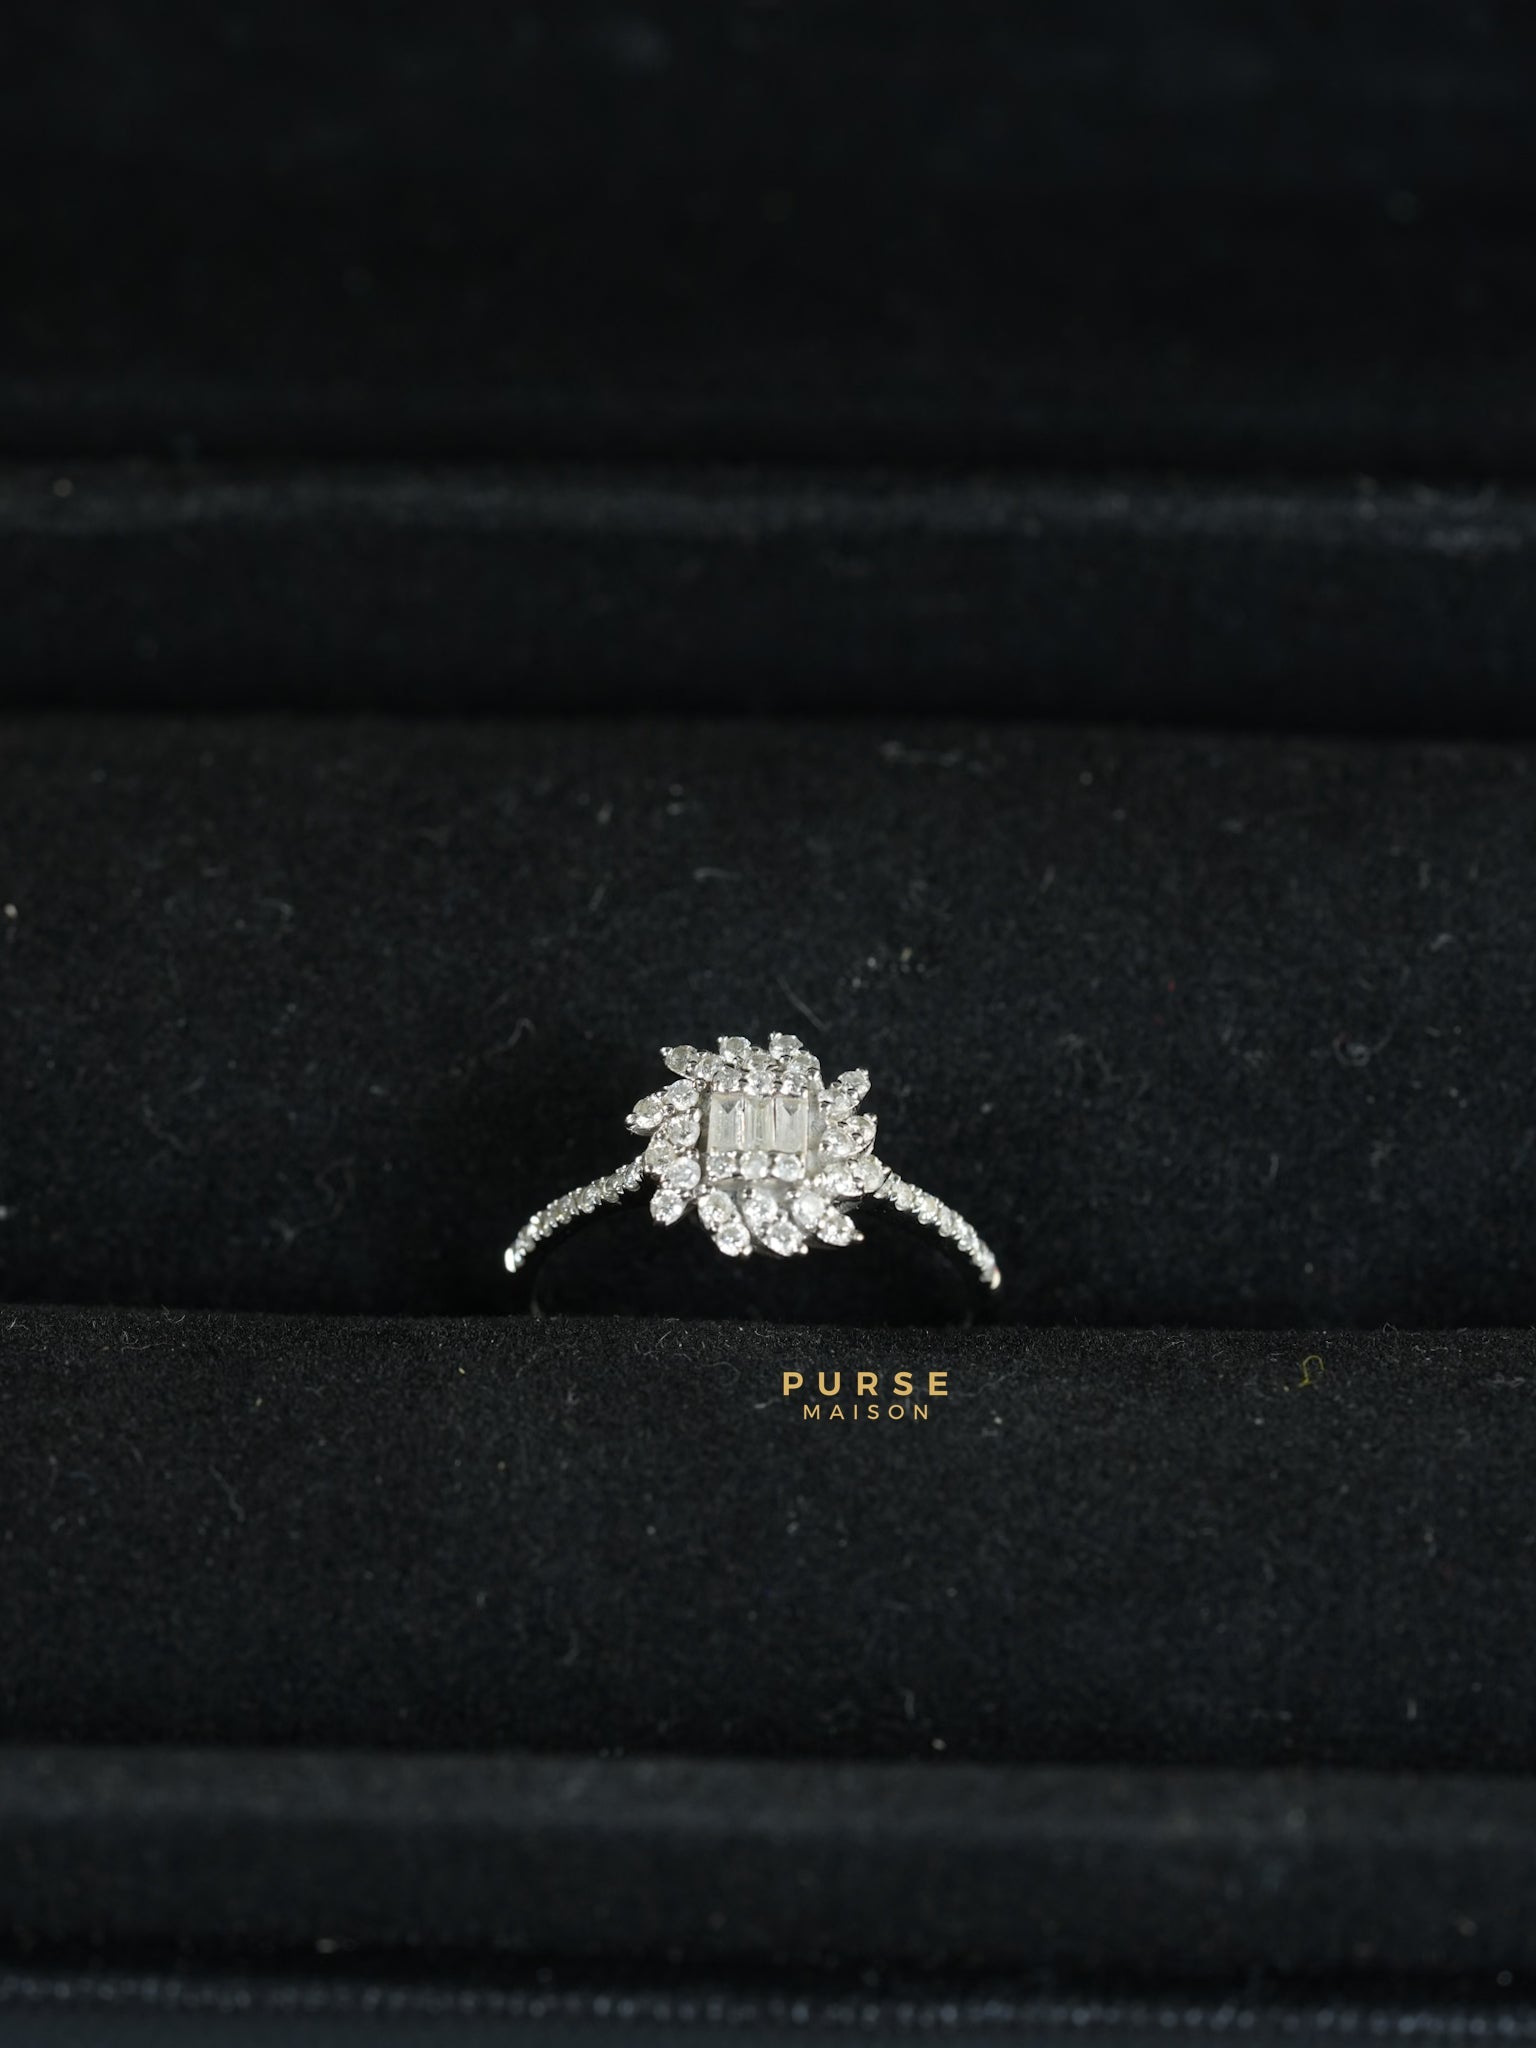 1 carat total weight Ring in Natural Diamonds & 18k White Gold | Purse Maison Luxury Bags Shop